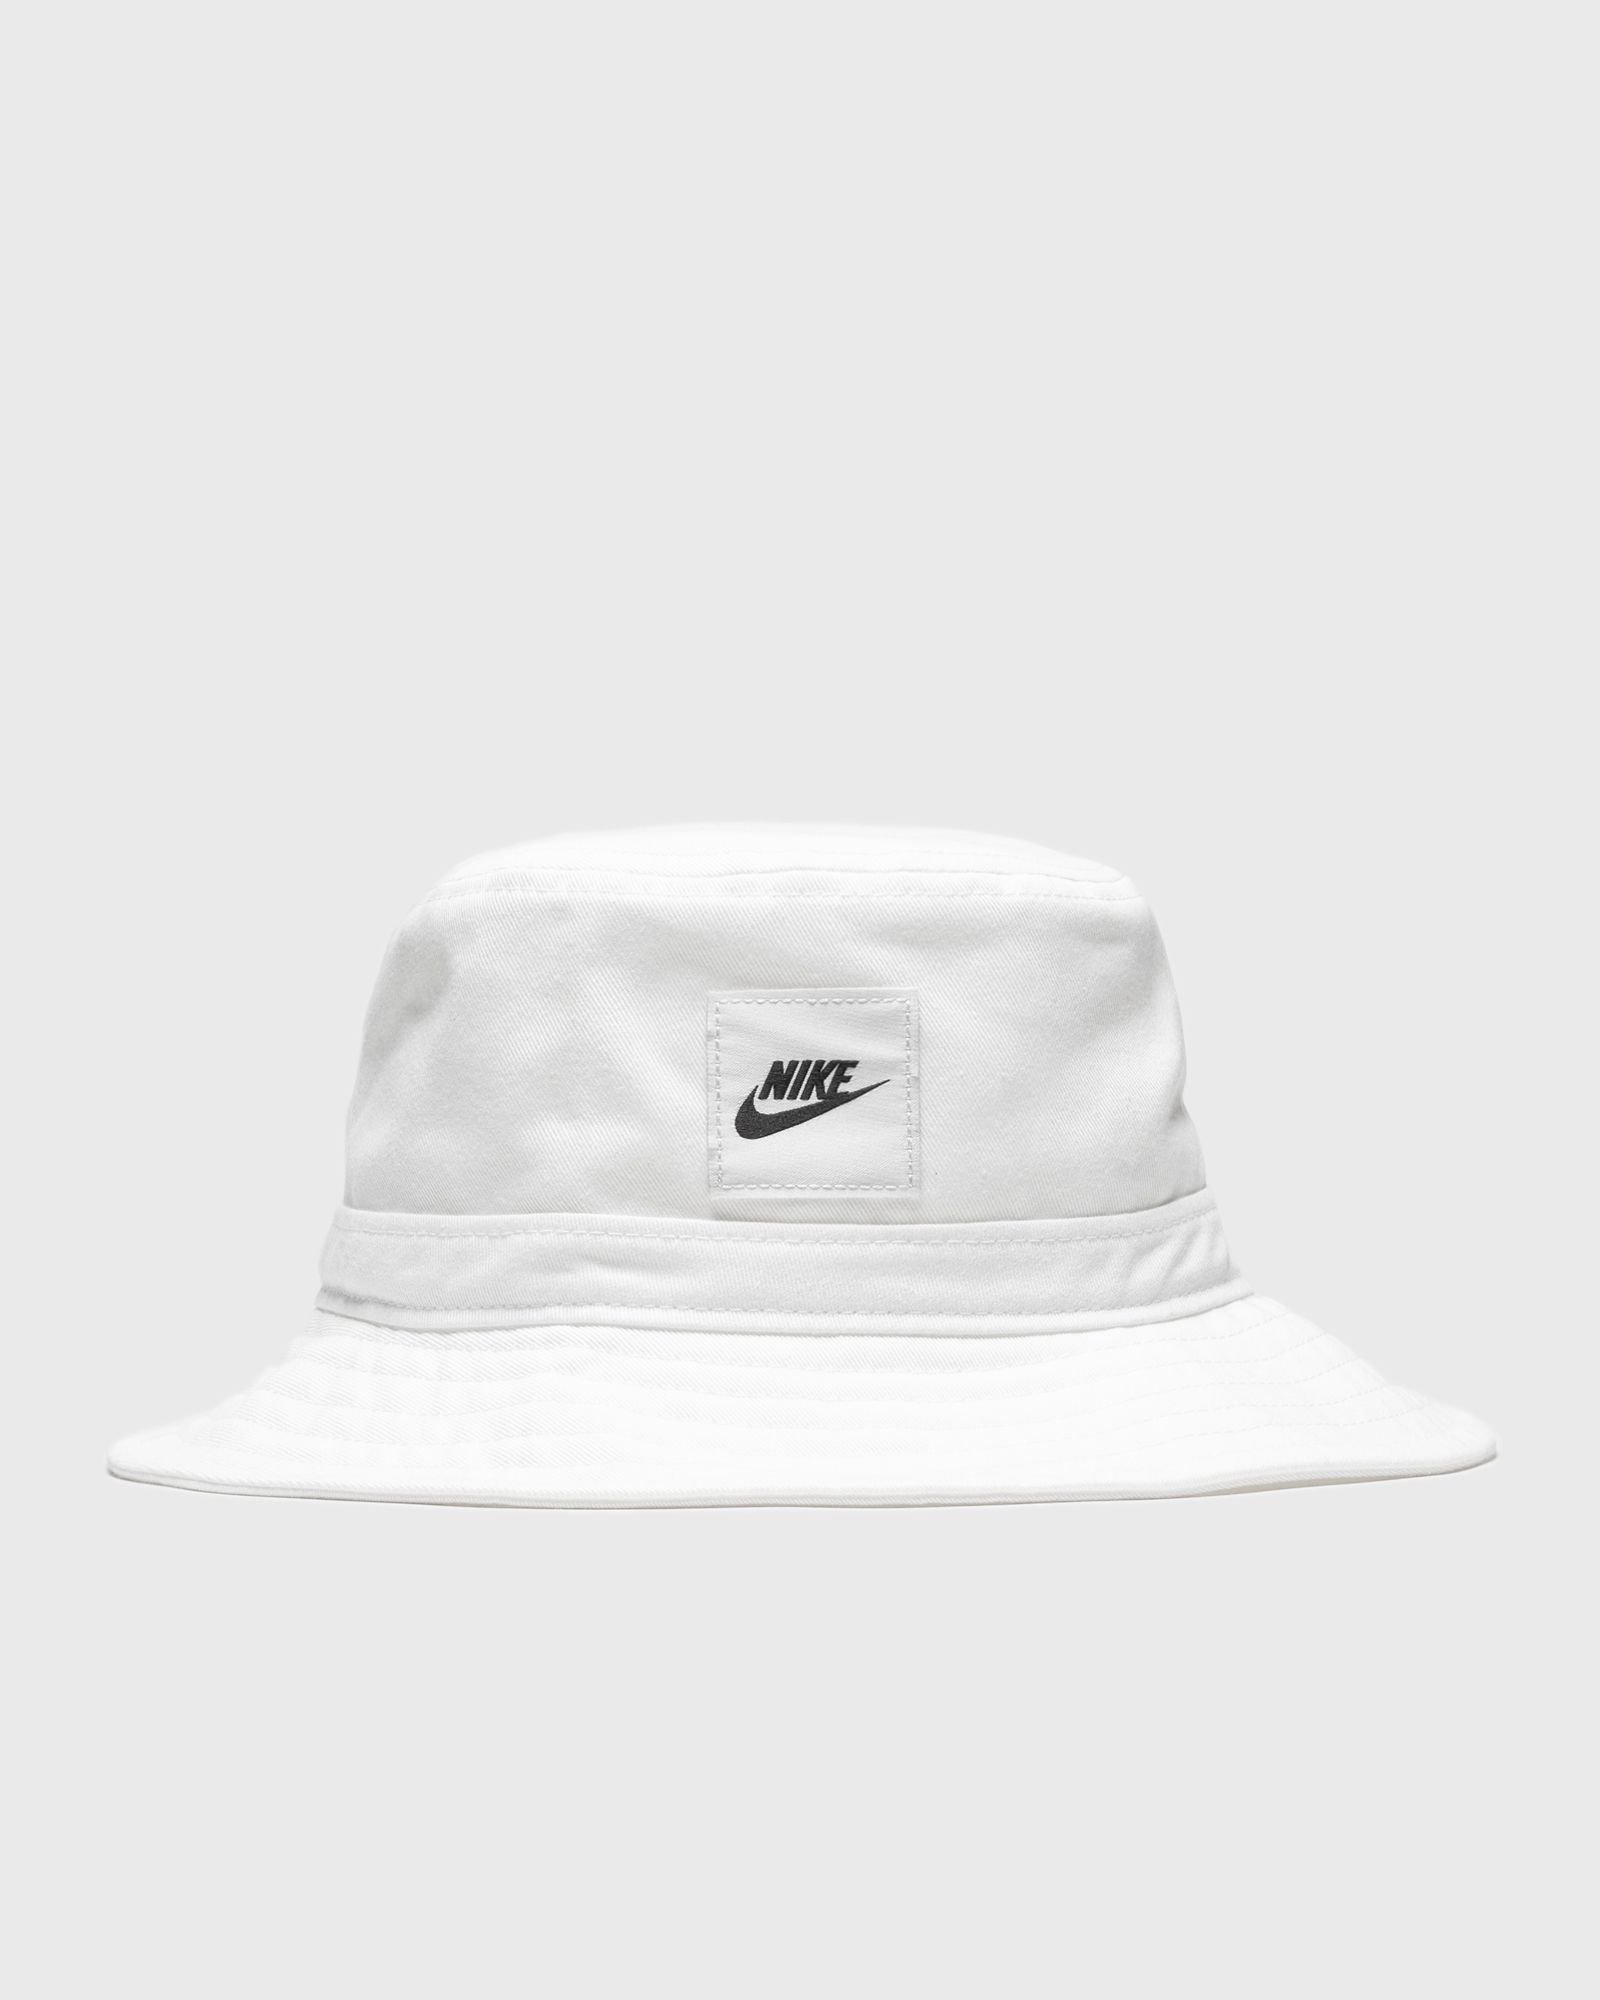 Nike Dri-fit Perforated Running Bucket Hat In Black Lyst, 58% OFF